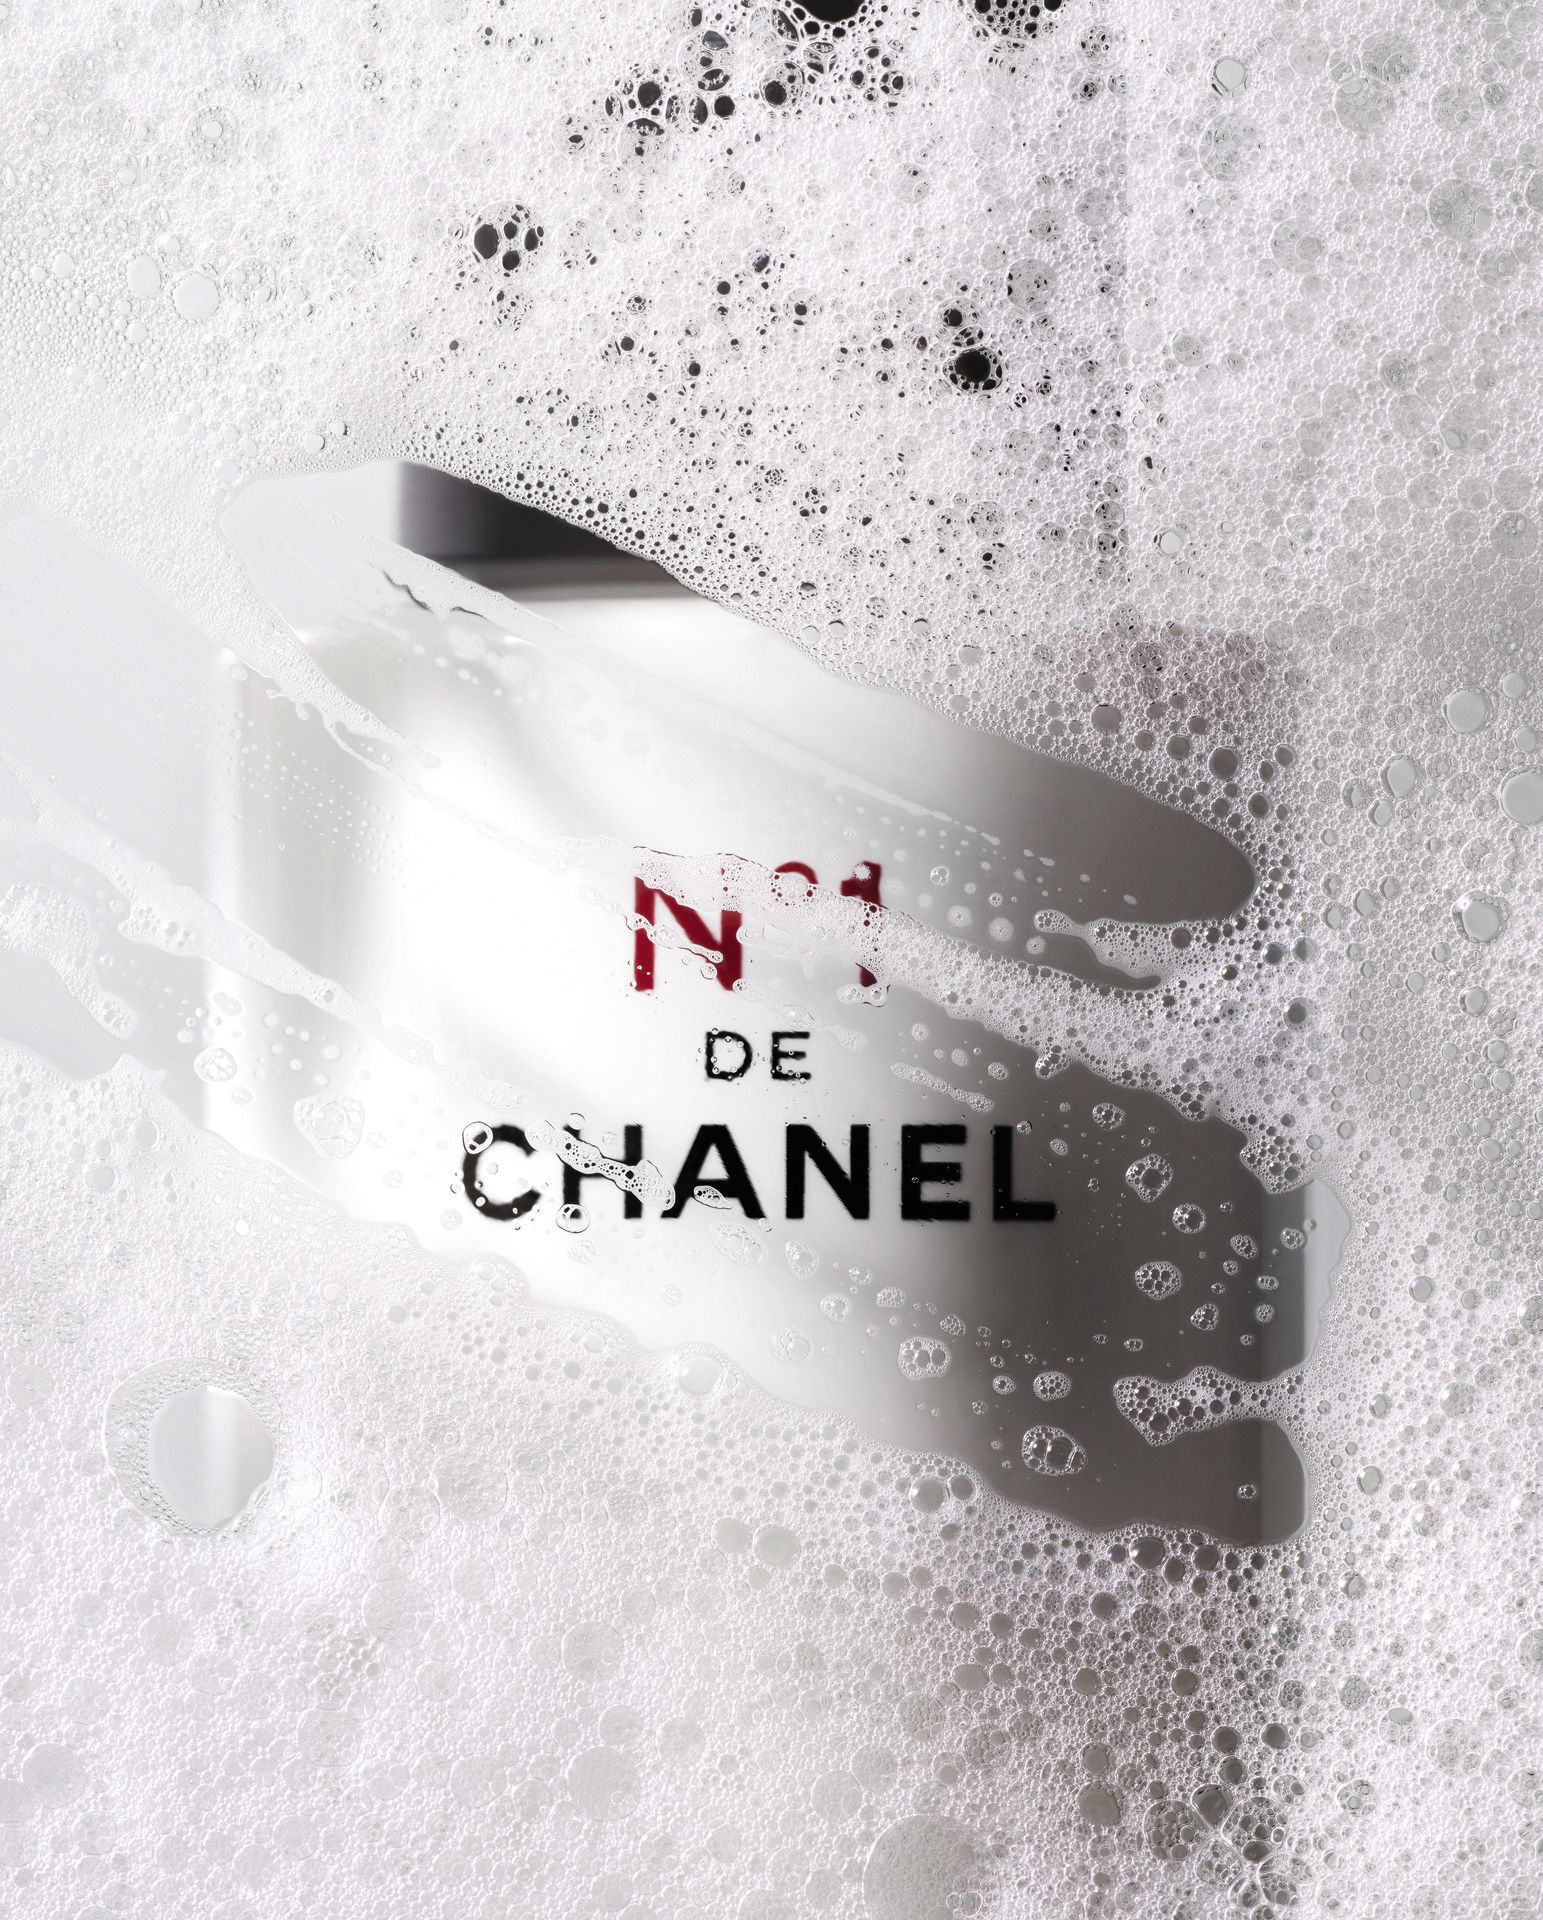 Chanel celebrates the beauty of nature with the new N°1 de Chanel line